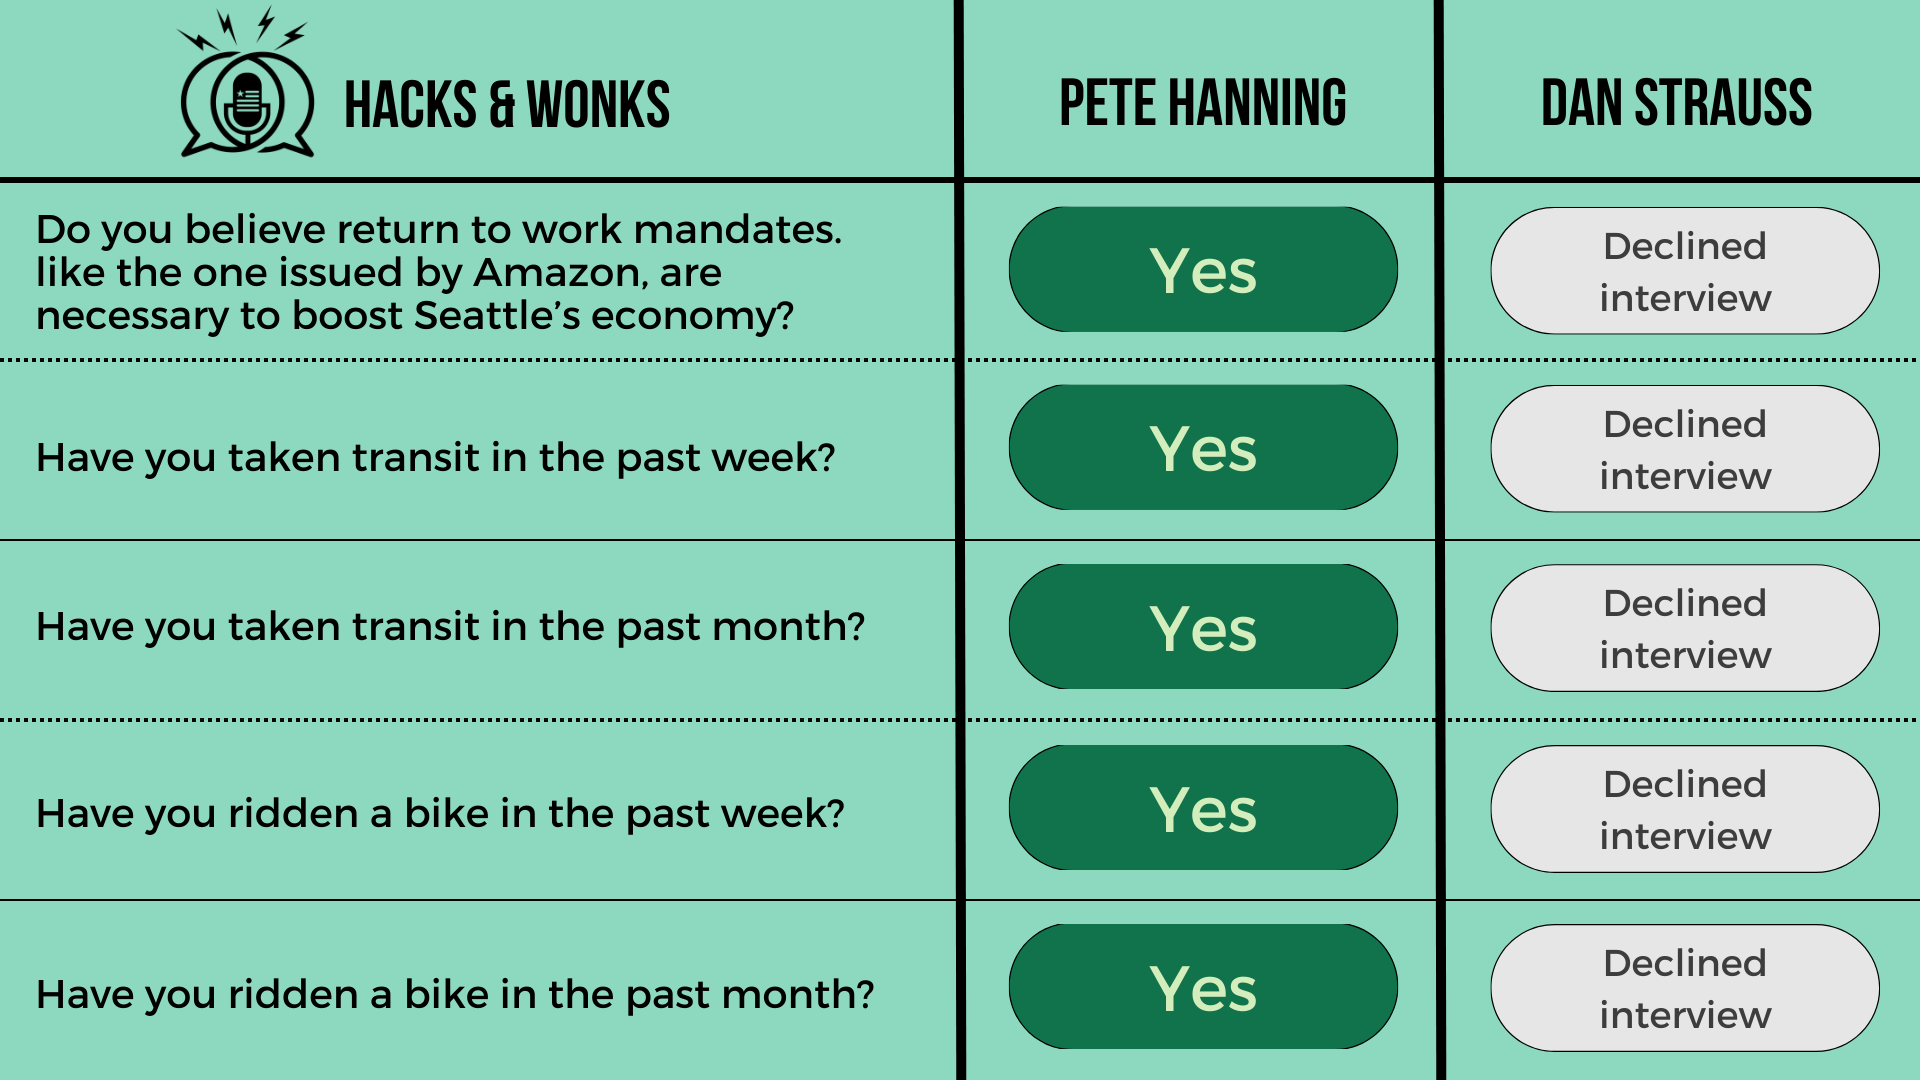 Q: Do you believe return to work mandates. like the one issued by Amazon, are necessary to boost Seattle’s economy? Pete Hanning: Yes, Dan Strauss: Declined interview  Q: Have you taken transit in the past week? Pete Hanning: Yes, Dan Strauss: Declin